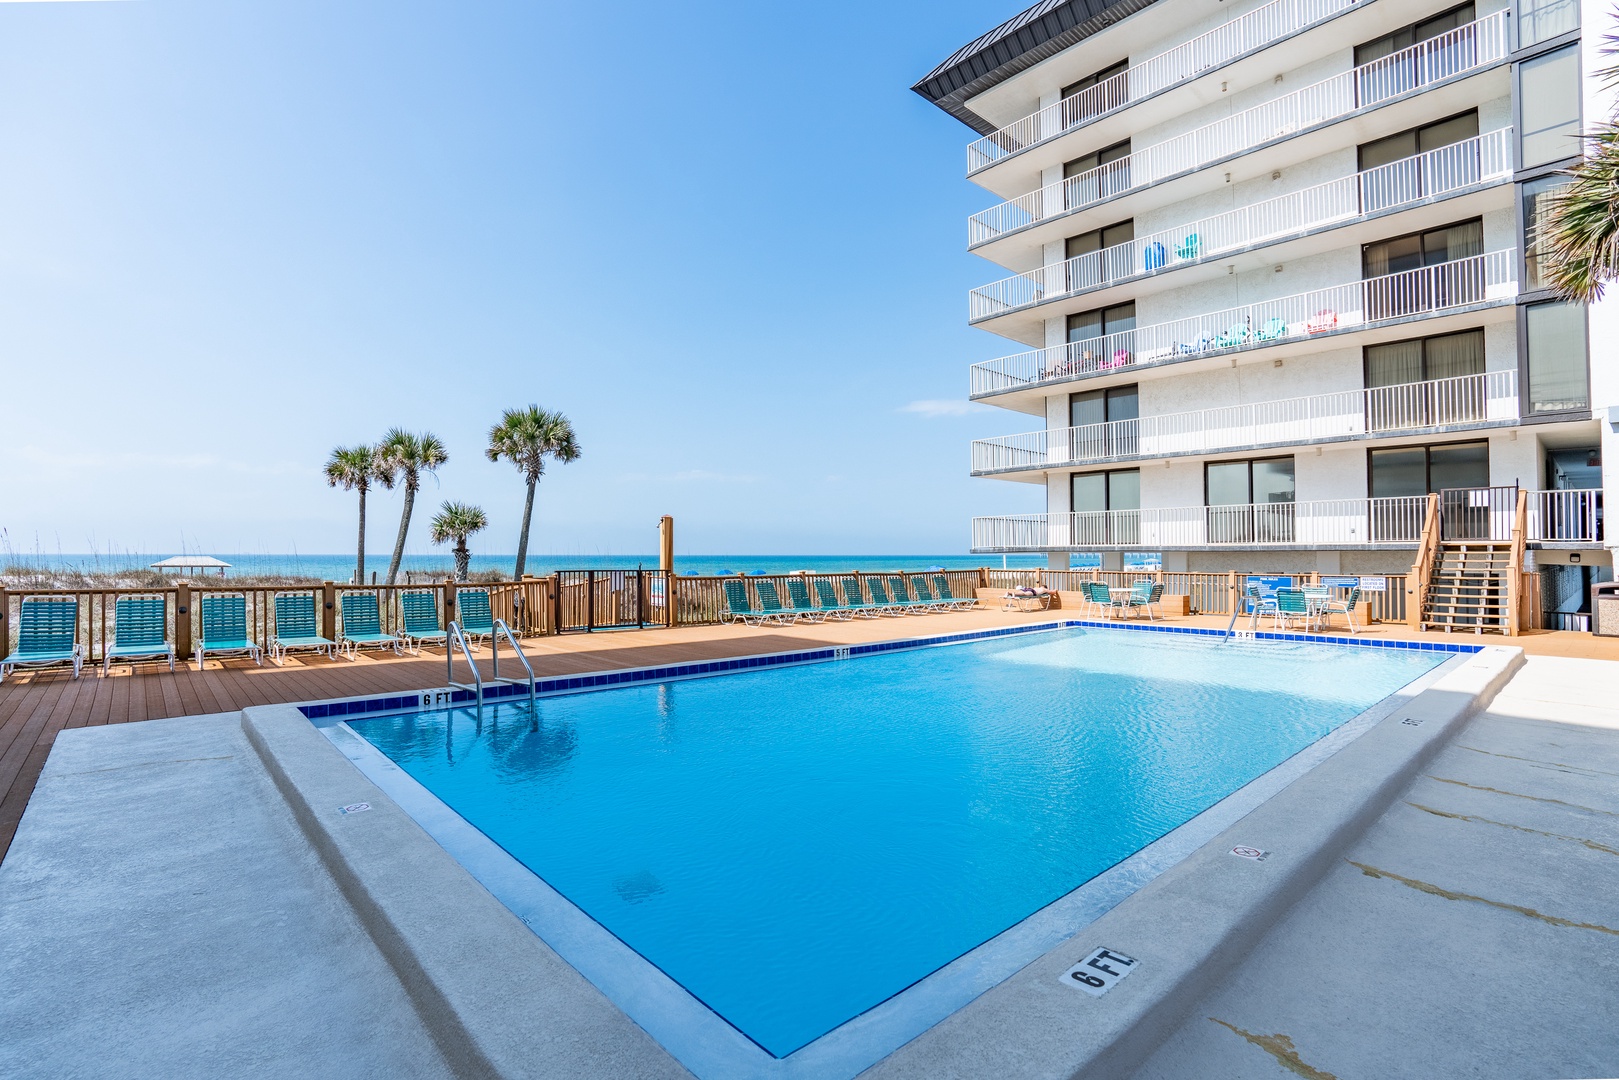 Make a splash in an oceanfront pool